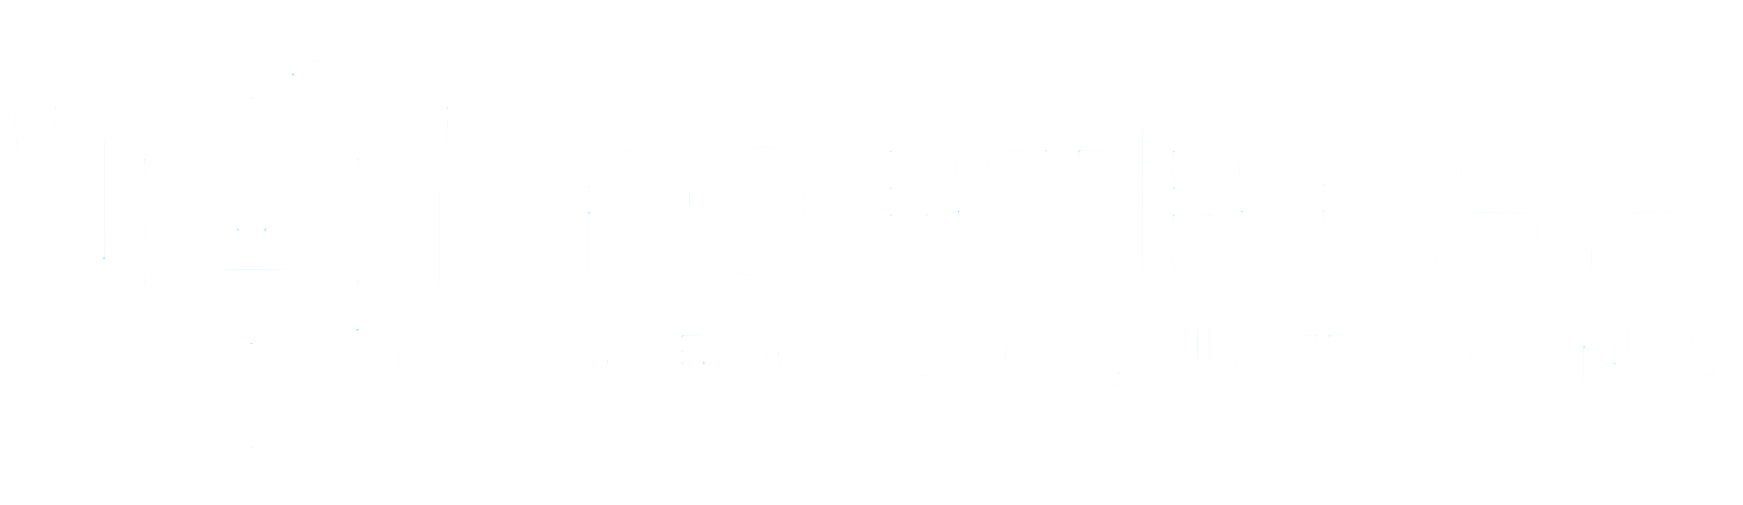 Fortress GRC Solutions